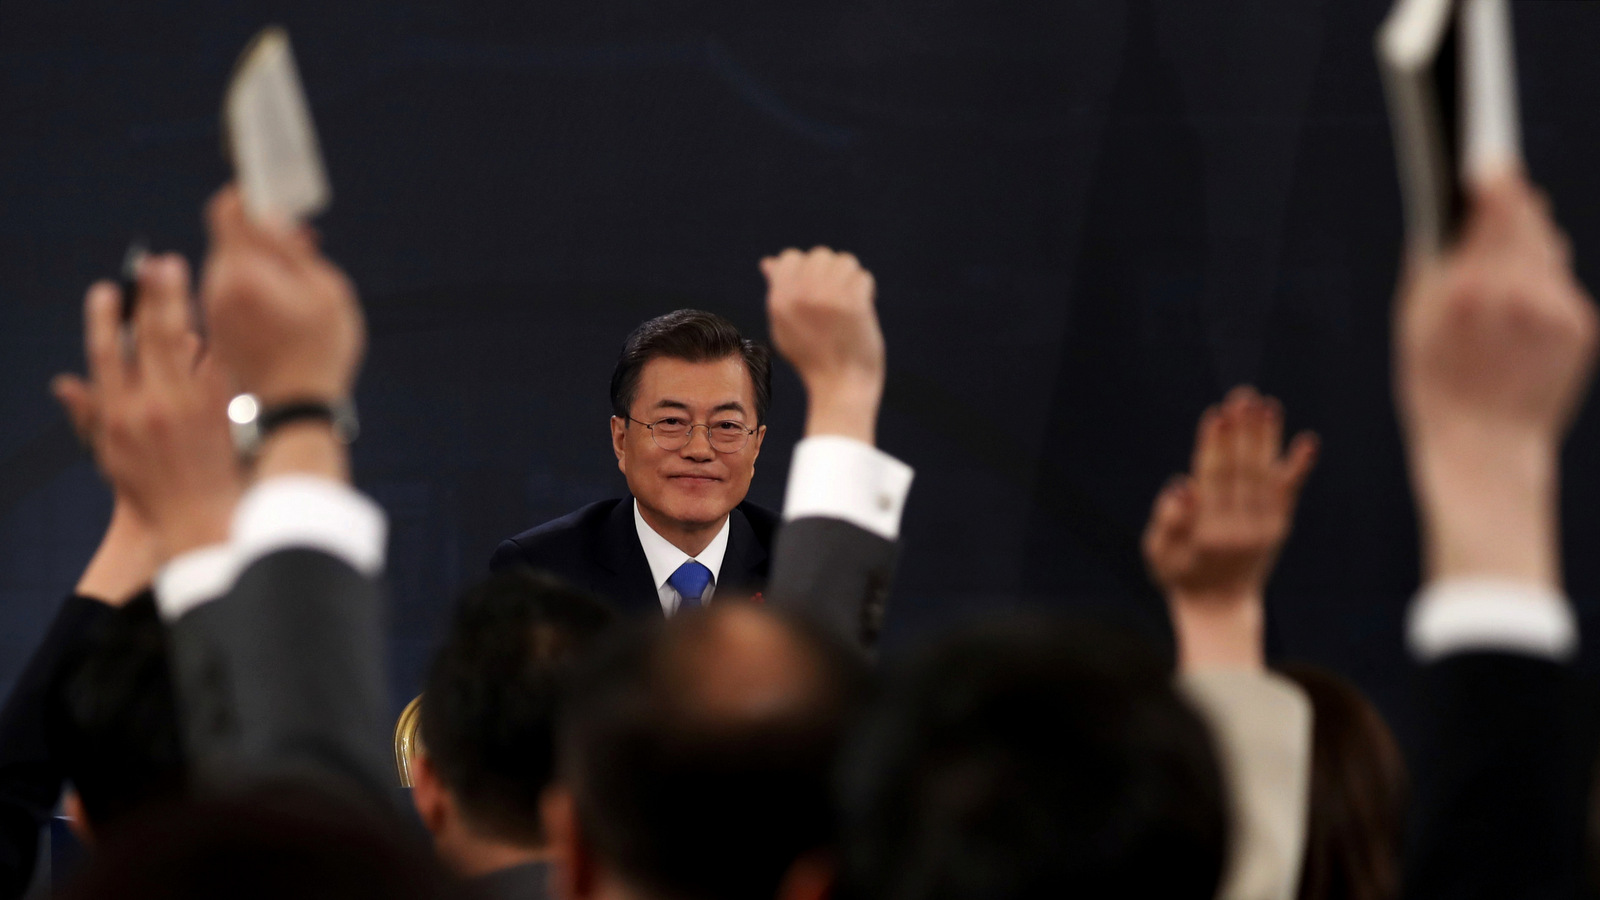 South Korean President Moon Jae-in attends the New Year news conference at the Presidential Blue House in Seoul, South Korea, Jan. 10, 2018. Moon announced he's open to meeting with North Korean leader Kim Jong-un if certain conditions are met, as he vowed to push for more talks with the North to resolve the nuclear standoff. (Kim Hong-Ji/AP)